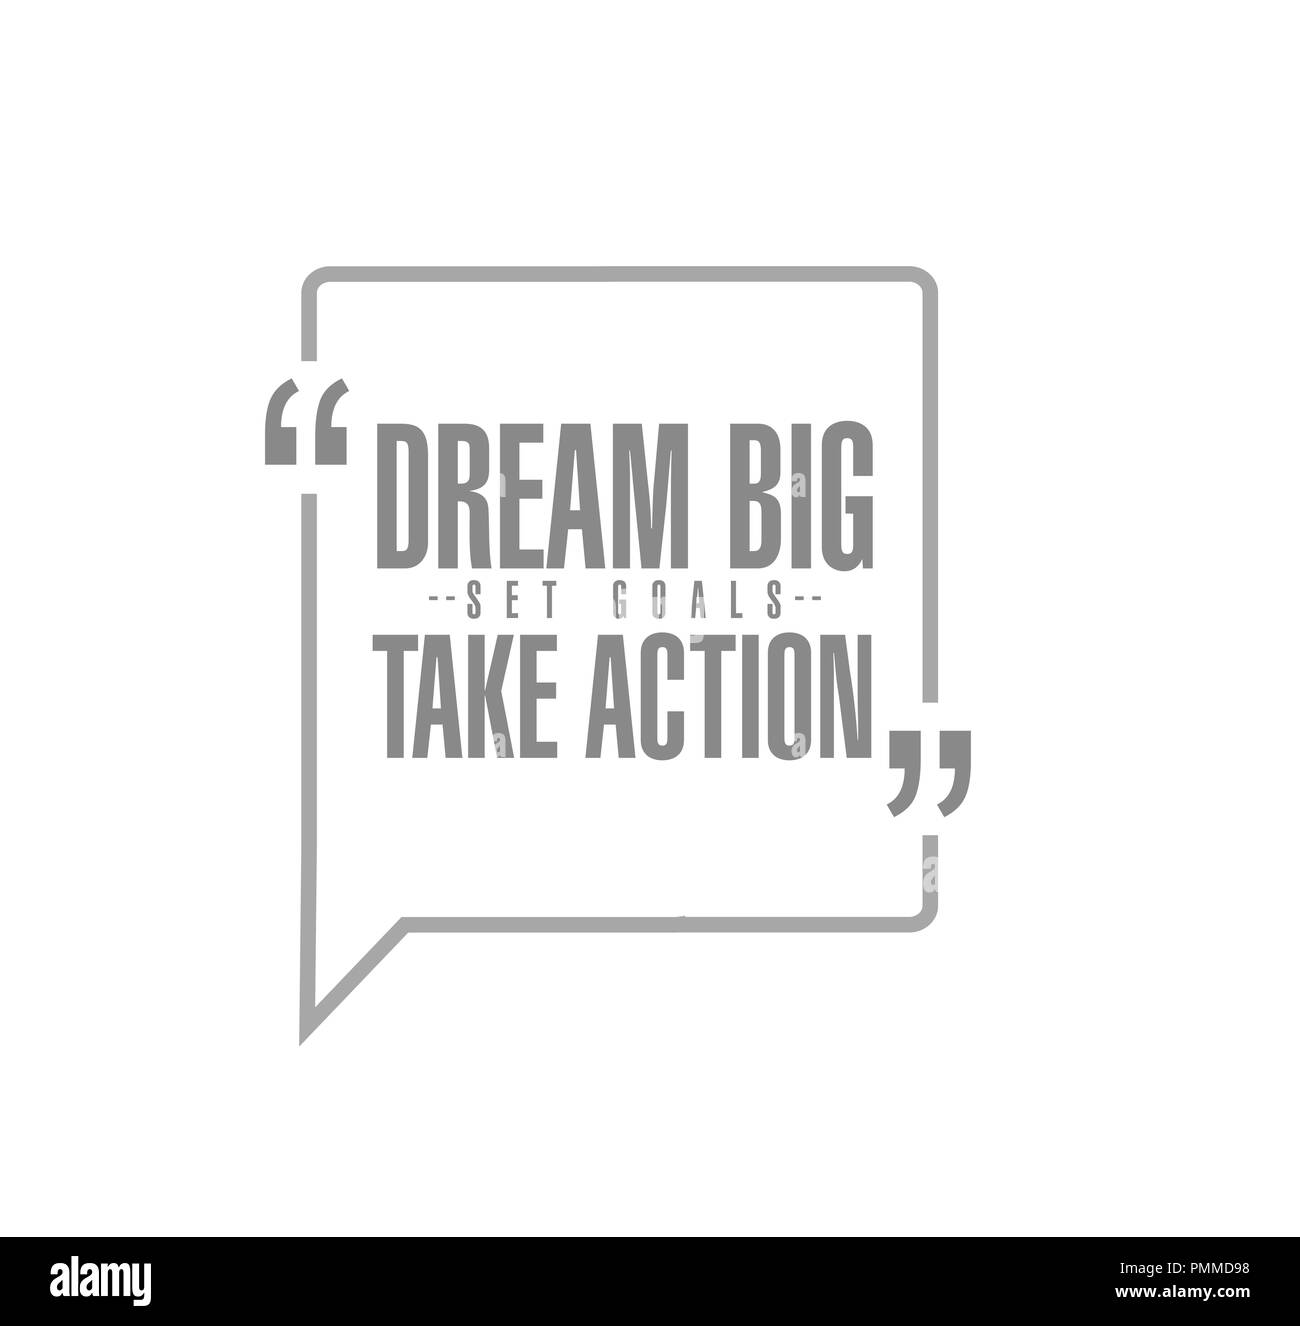 dream big, set, goals, take action line quote message concept isolated over a blue background Stock Photo